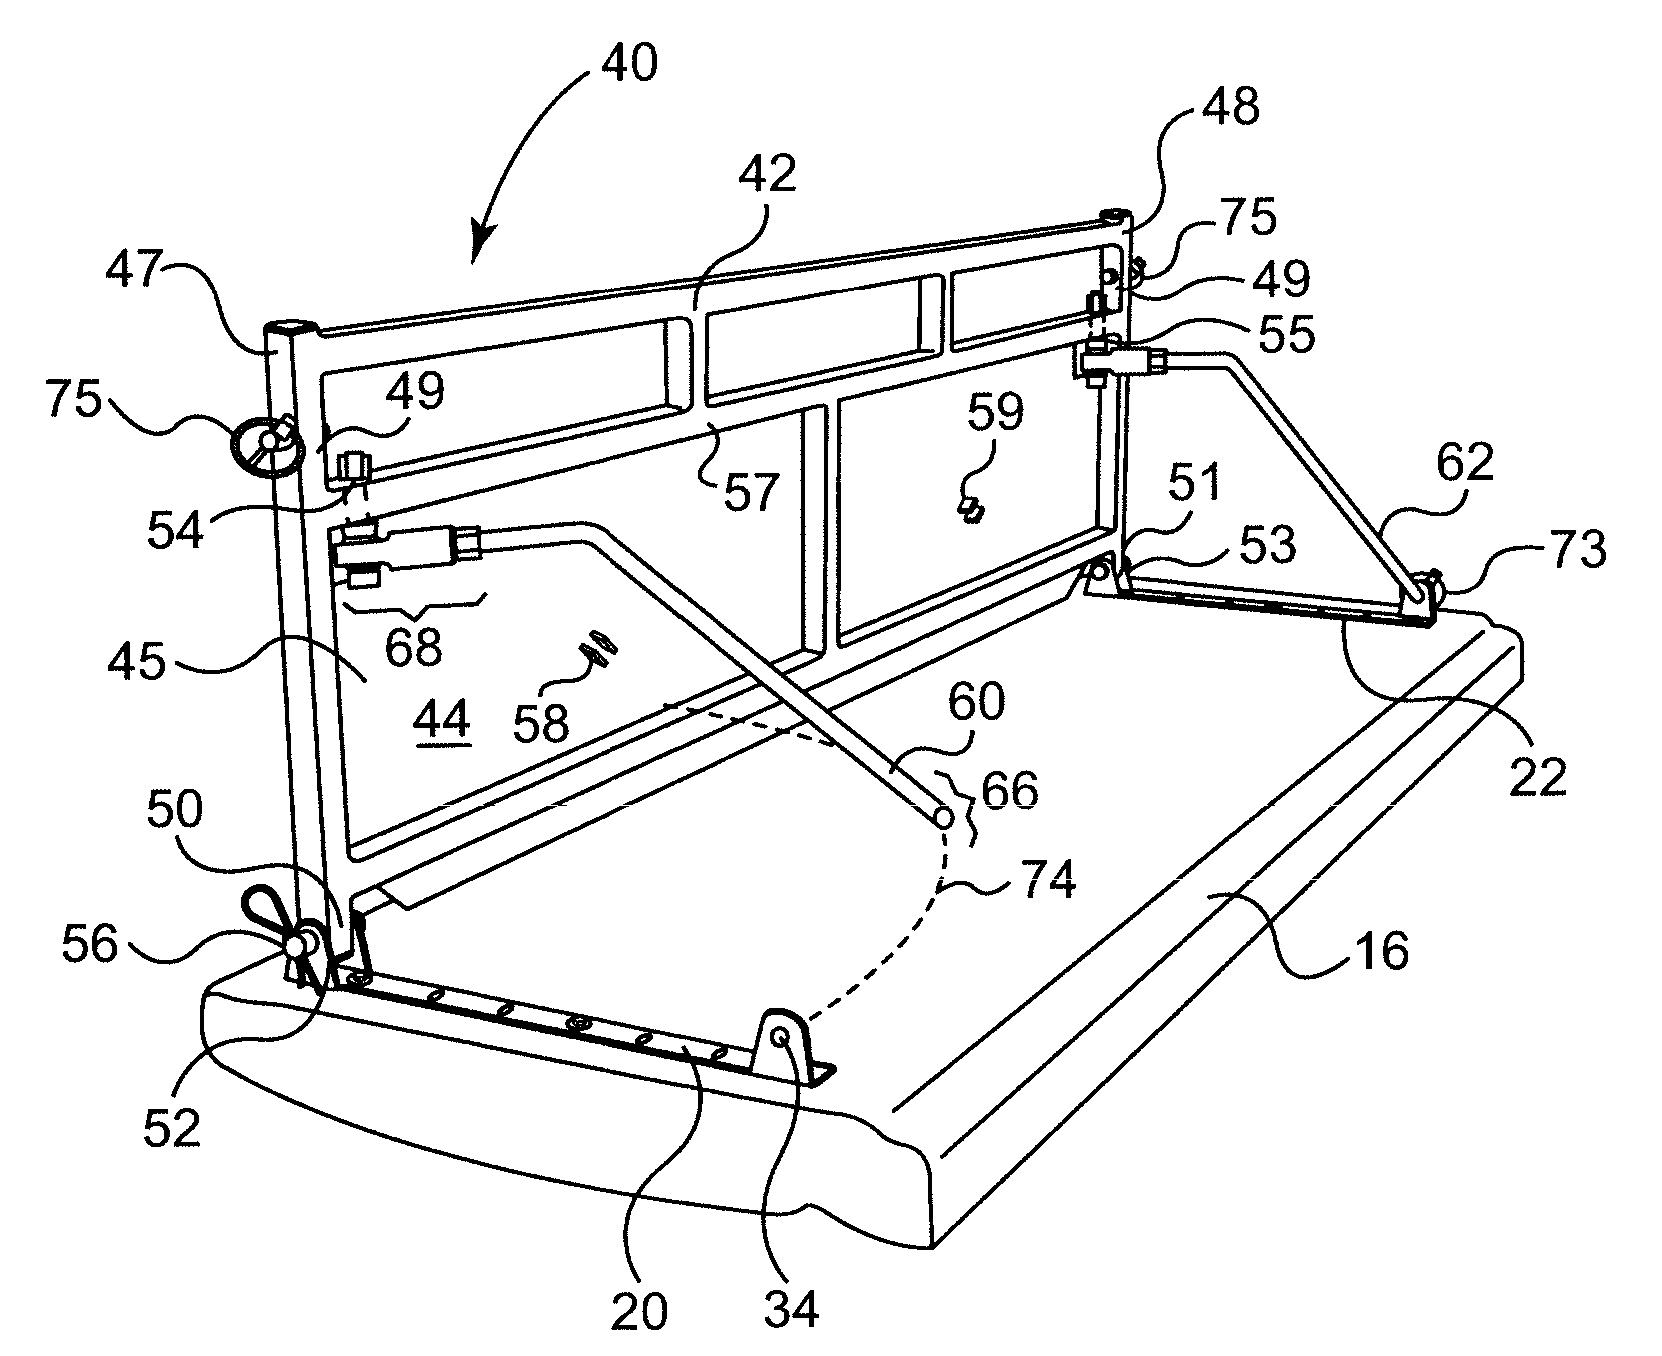 Device and method for extending truck cargo space